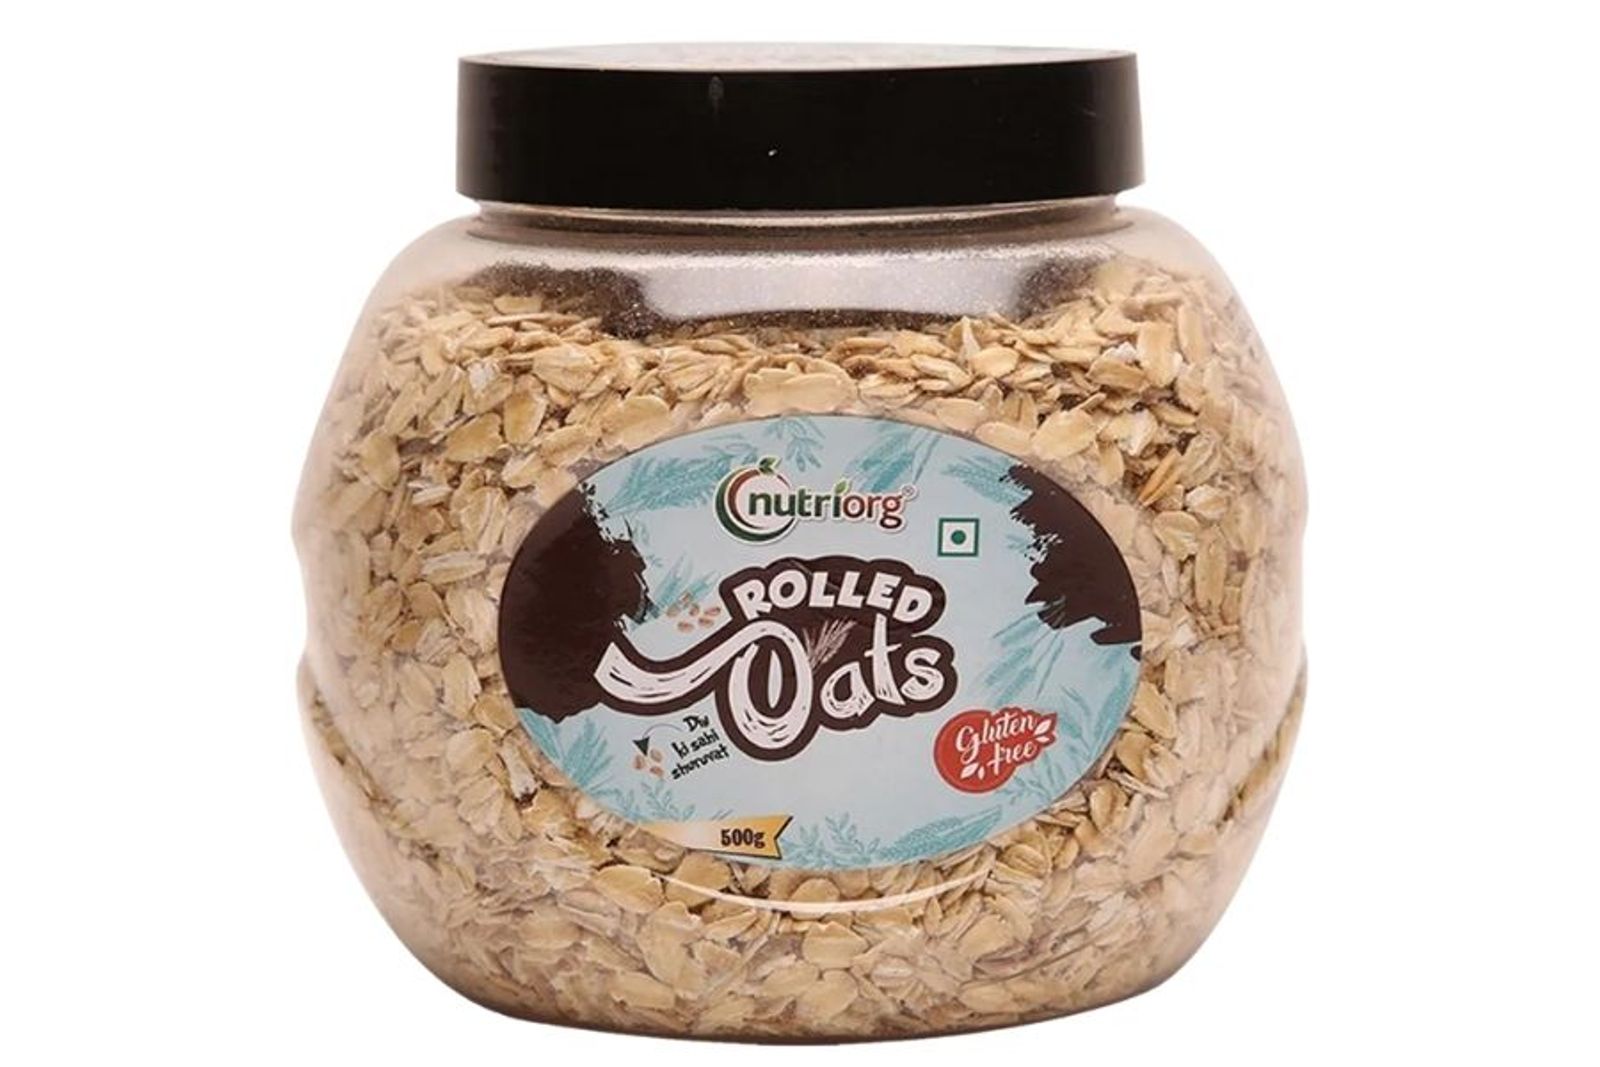 Nutriorg Rolled Oats